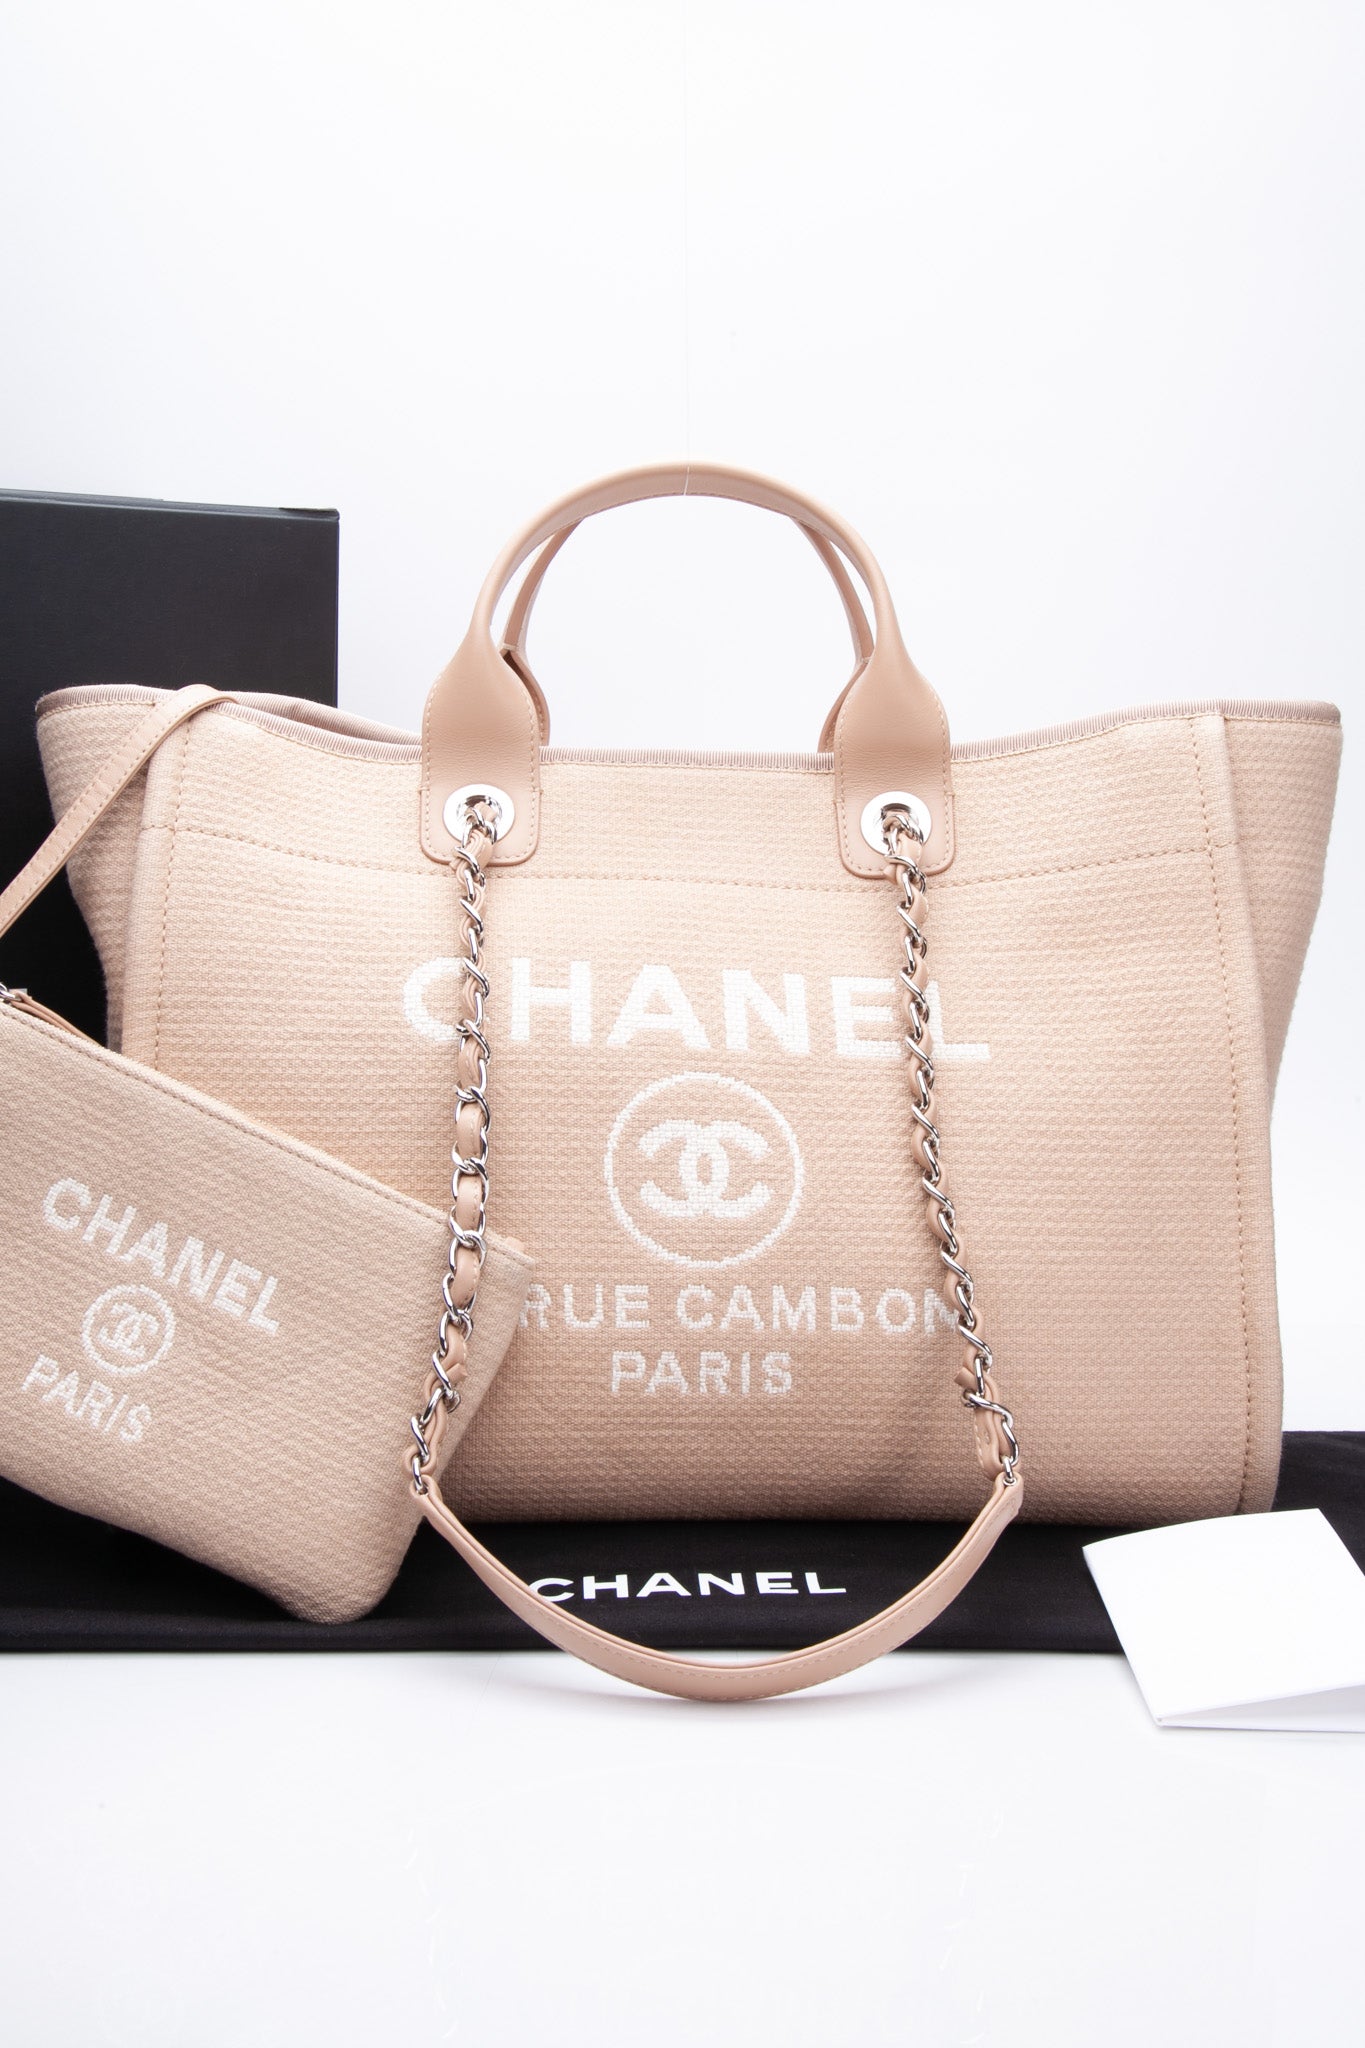 Chanel Canvas Beige Large Deauville Tote